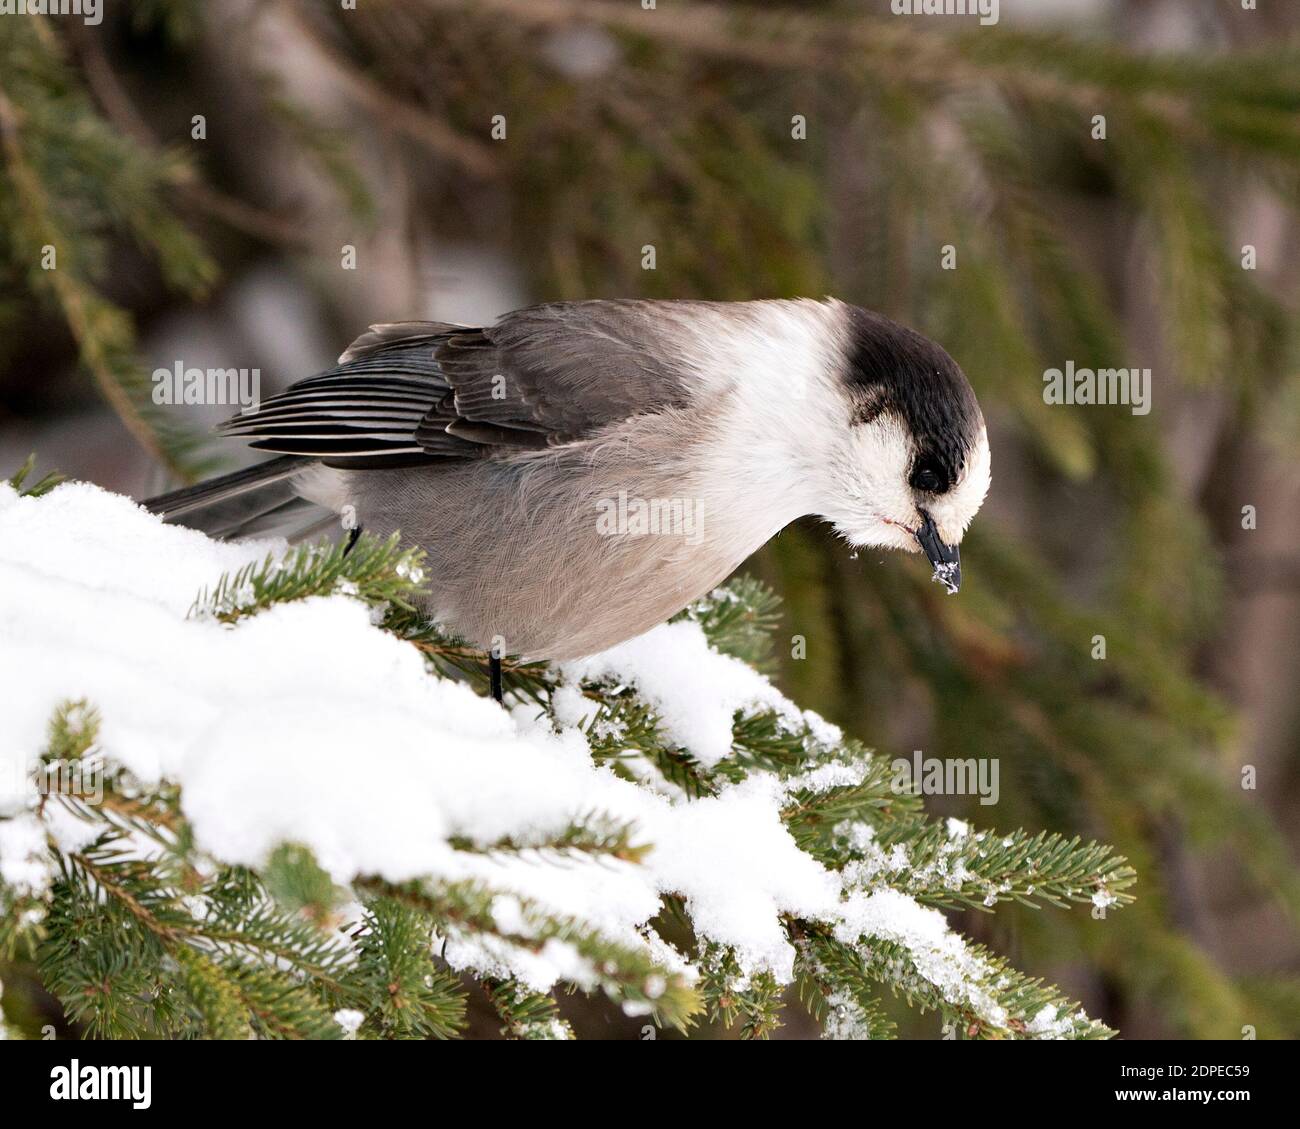 Grey Jay perched on branch with blur background in its environment and habitat. Image. Picture. Portrait. Christmas card. Grey Jay Stock Photos. Stock Photo